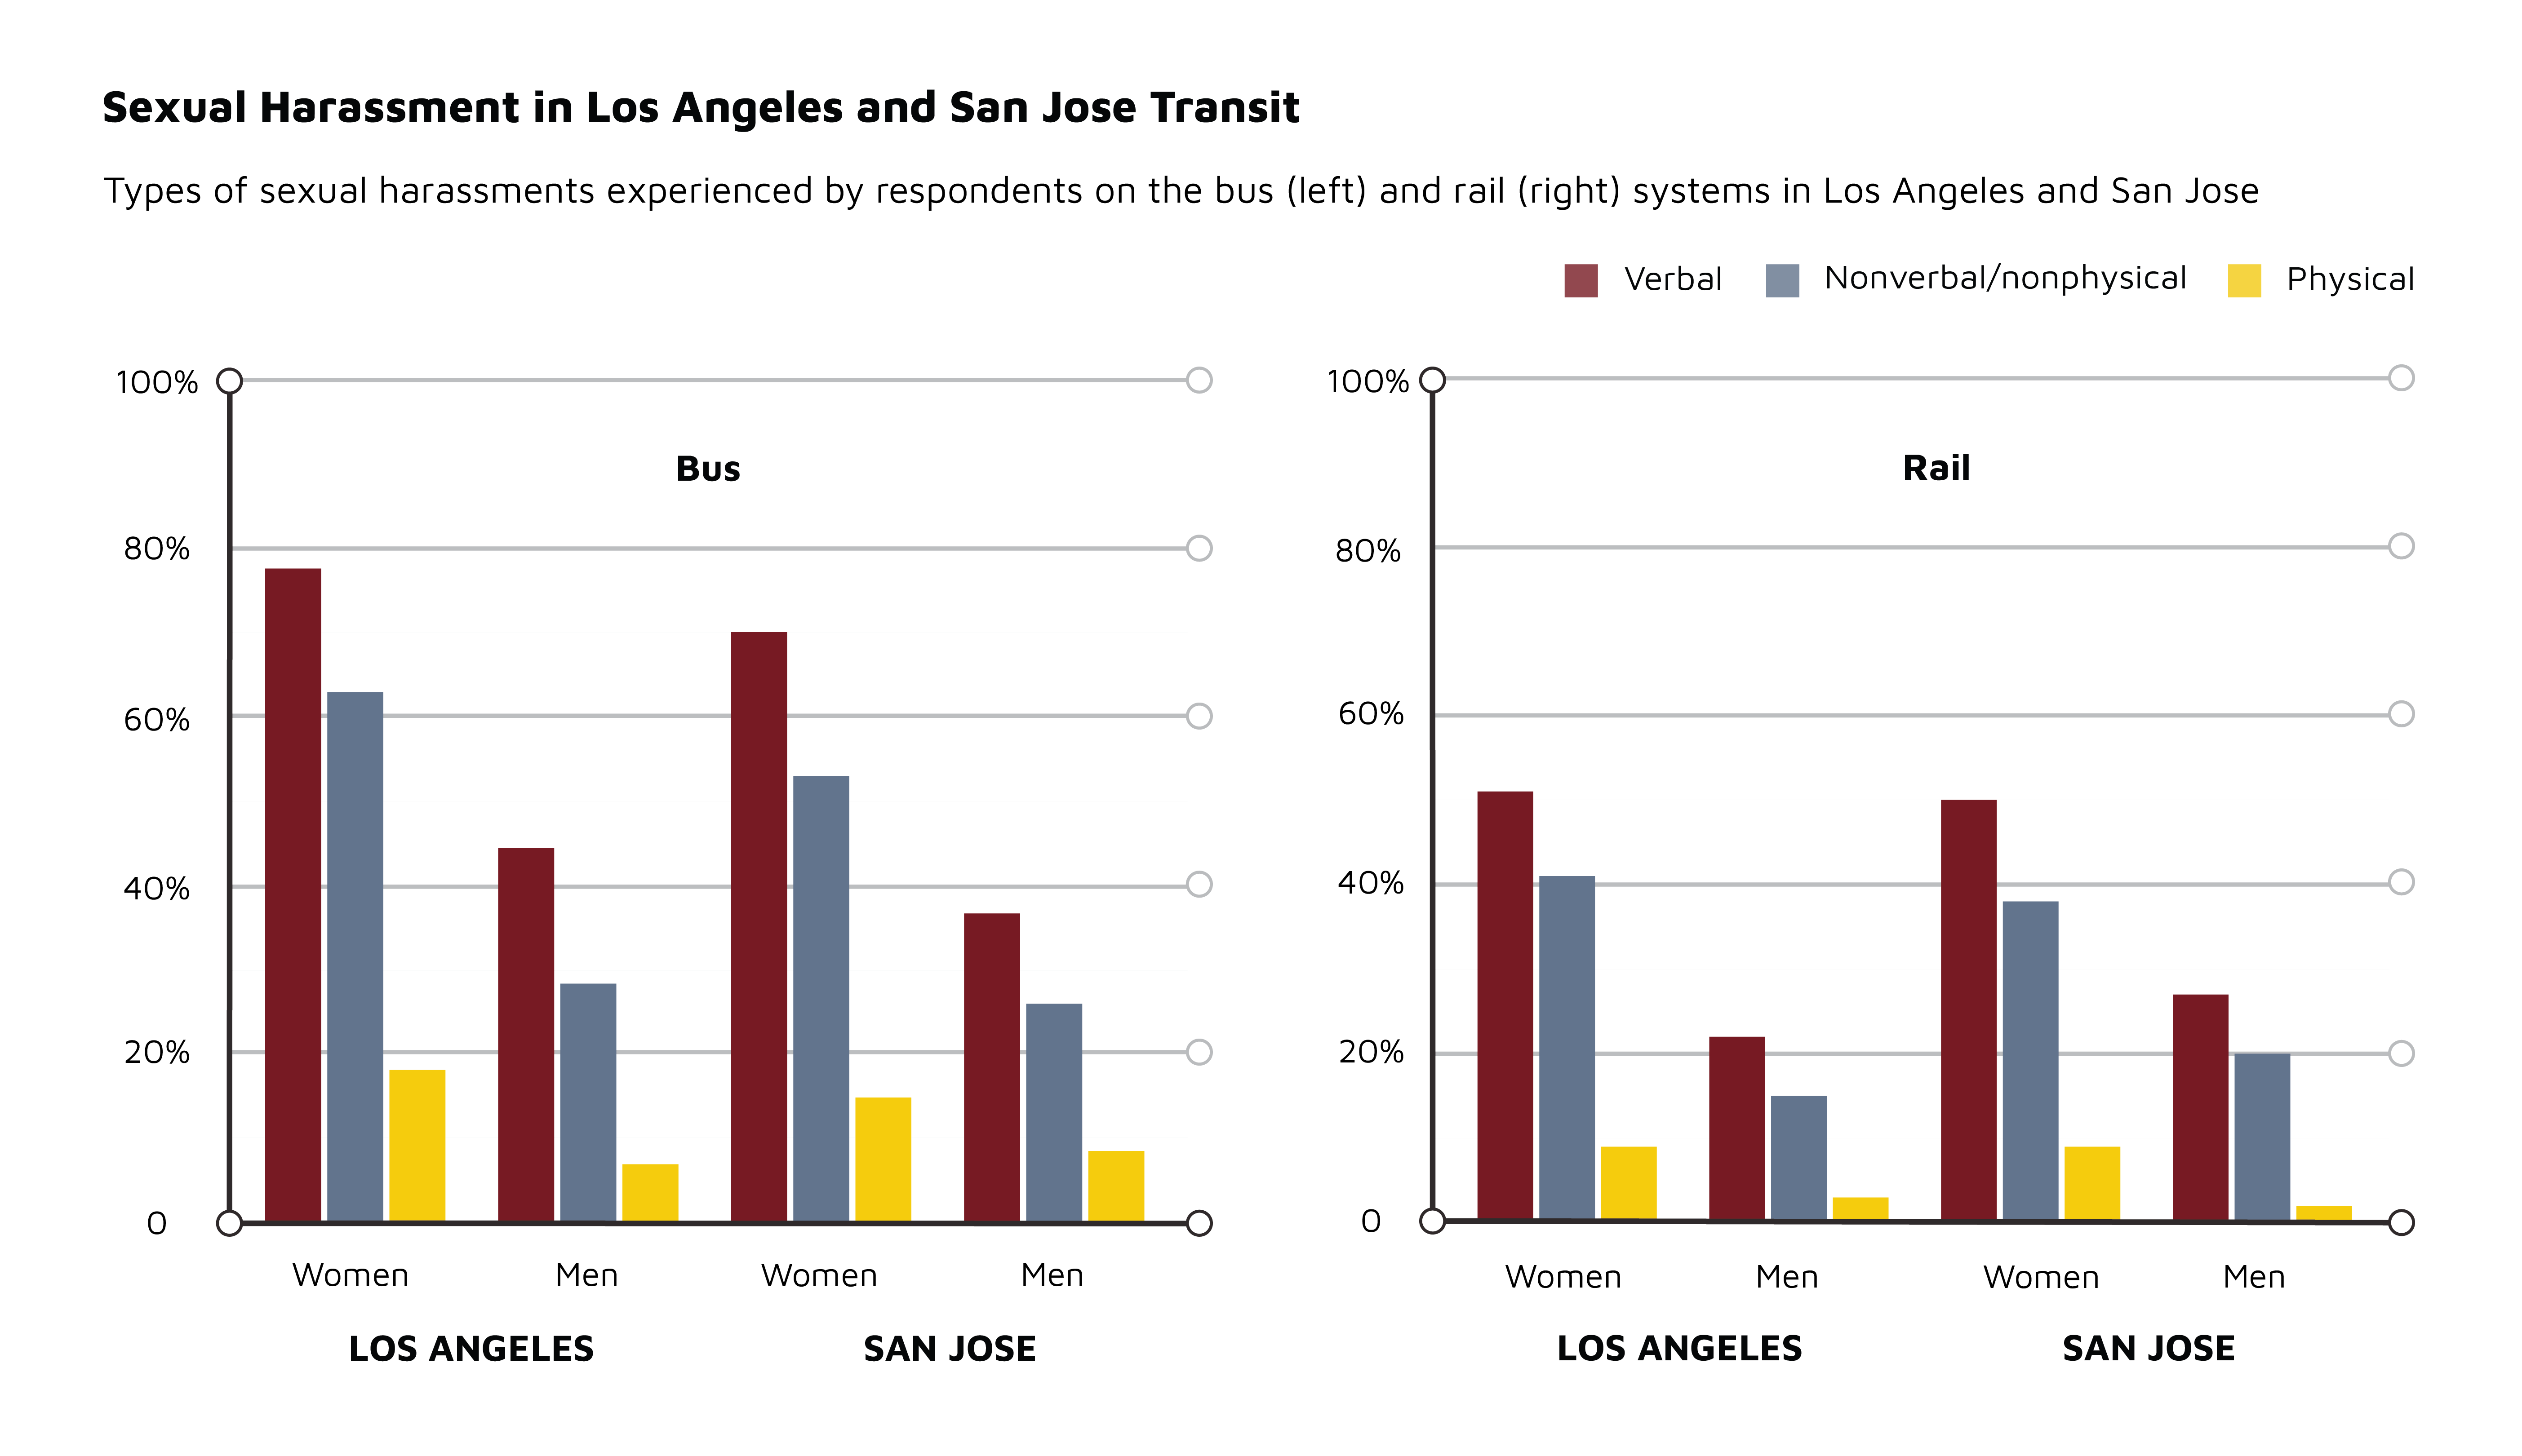 Sexual Harassment in Los Angeles and San Jose Transit Types of sexual harassment experienced by respondents on the bus (left) and rail (right) systems in Los Angeles and San Jose.